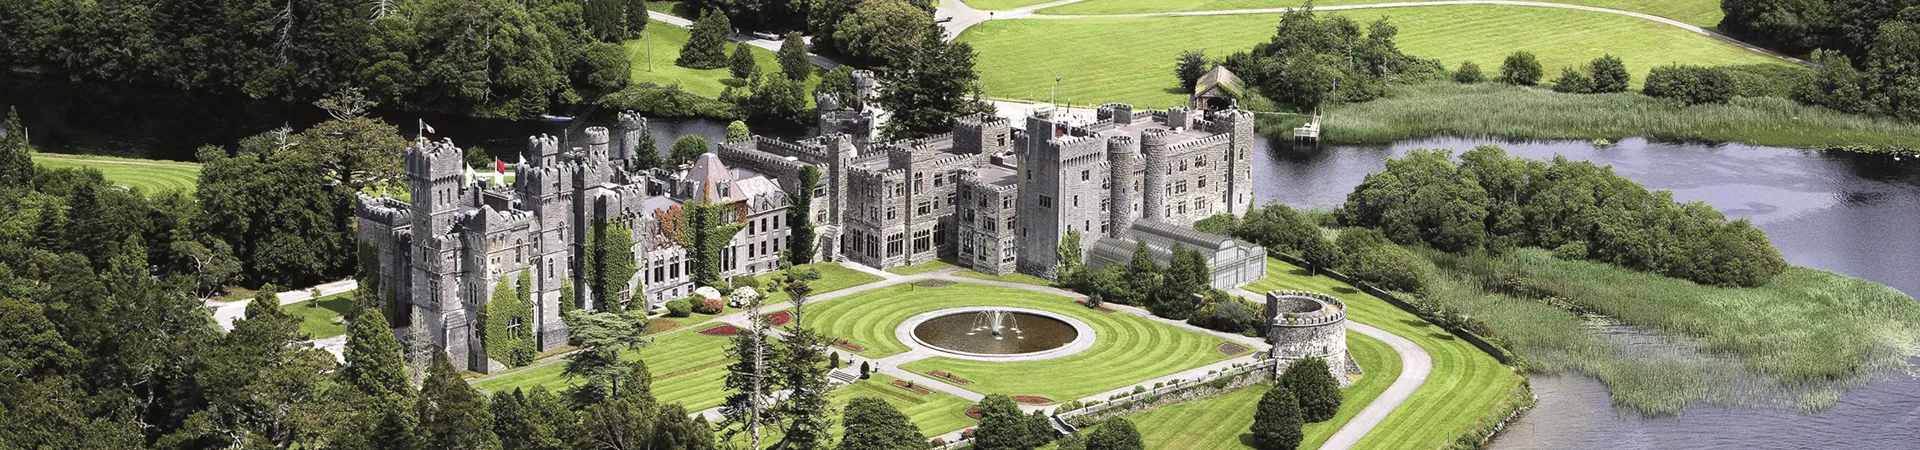 An aerial view of Ashford Castle in Cong Ireland